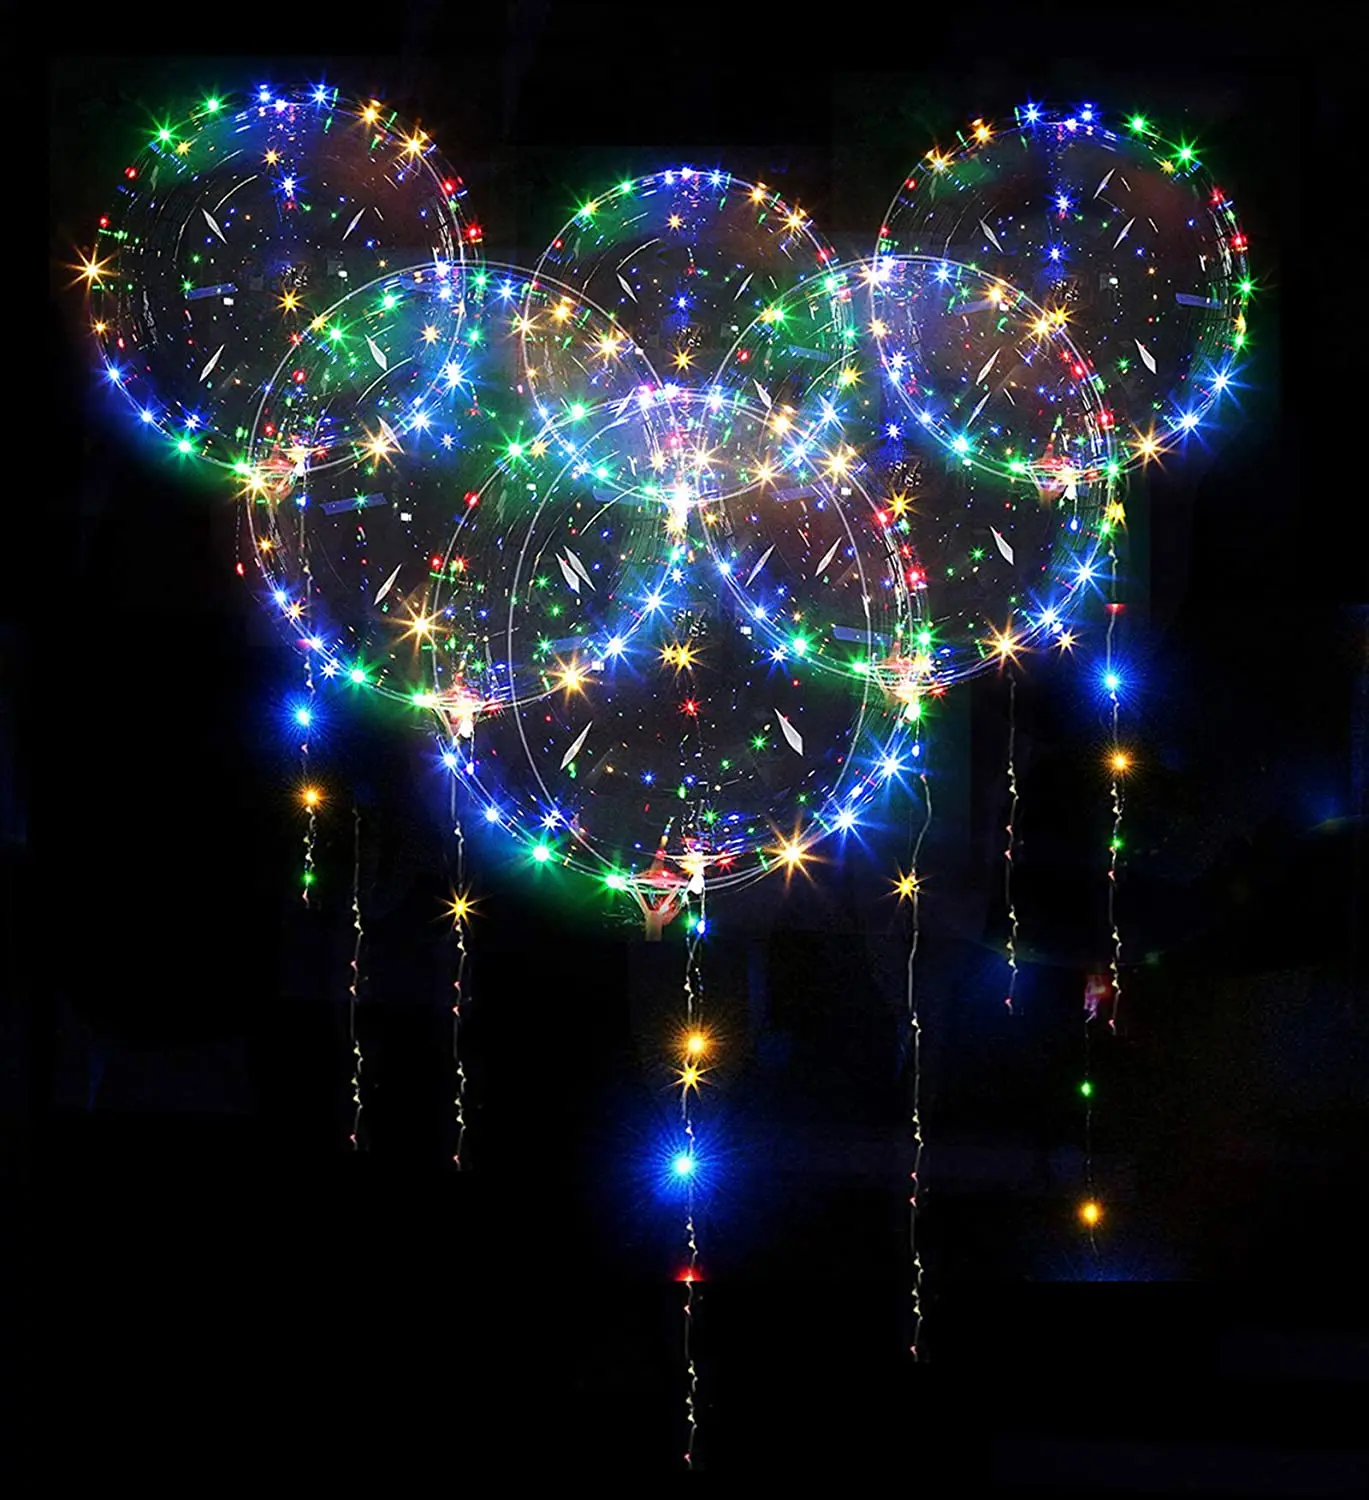 

5 Packs LED Light Up BoBo Balloons Decoration Indoor or Outdoor Birthday Wedding New Year Party Christmas Celebrations